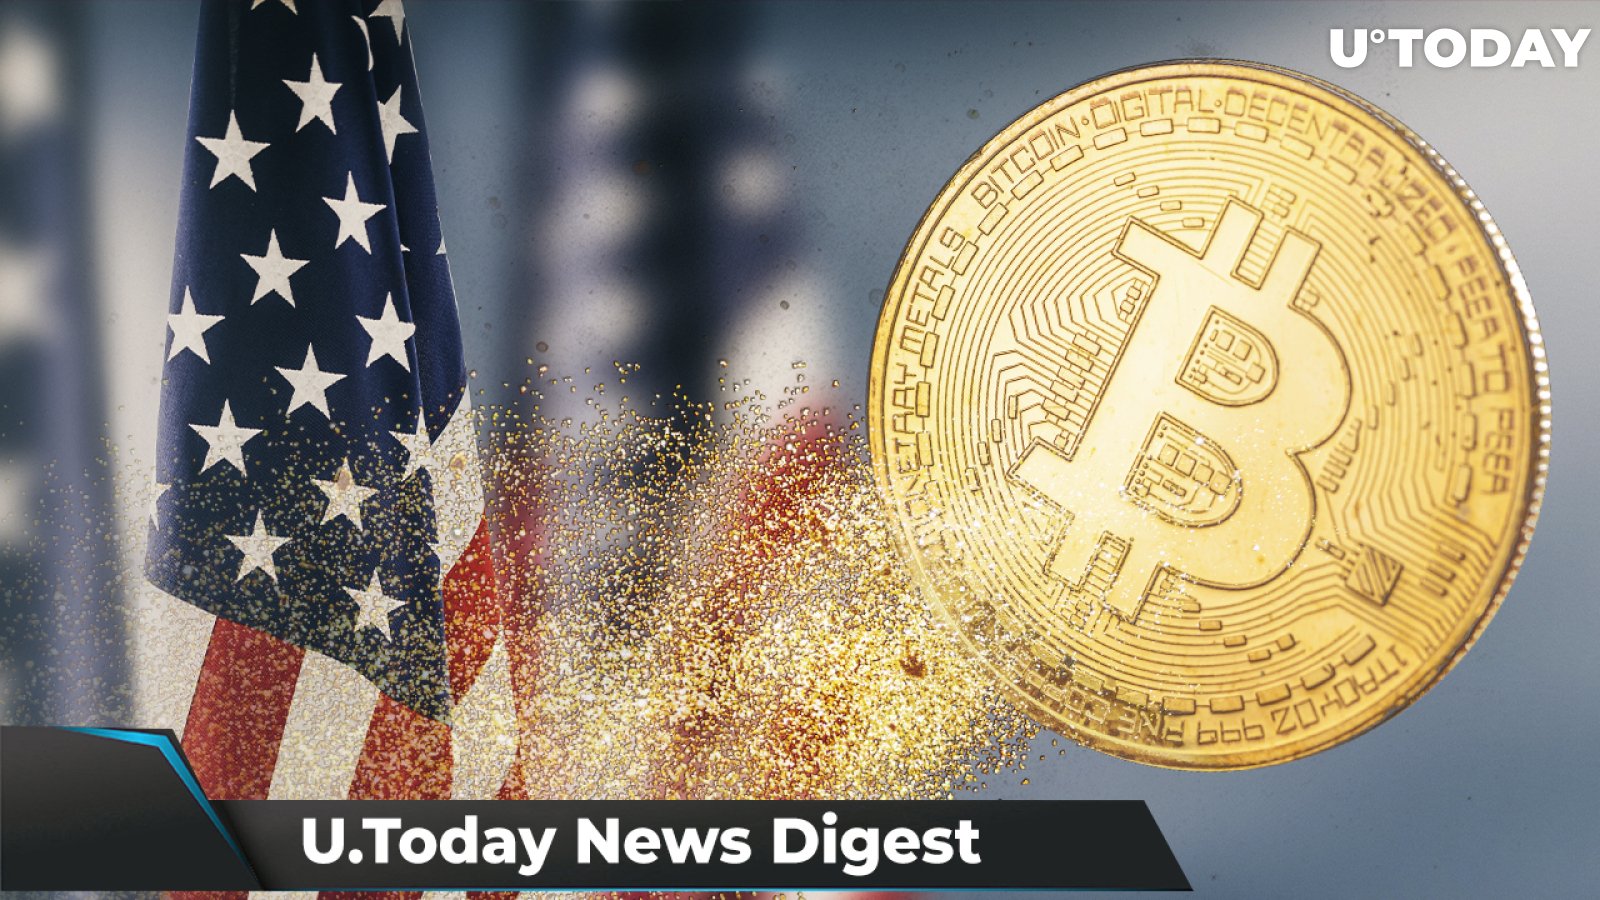 American Bank to Allow Buying BTC and ETH, SHIB Accepted in Dubai Cafe, UFC to Pay Fighters in Crypto: Crypto News Digest by U.Today